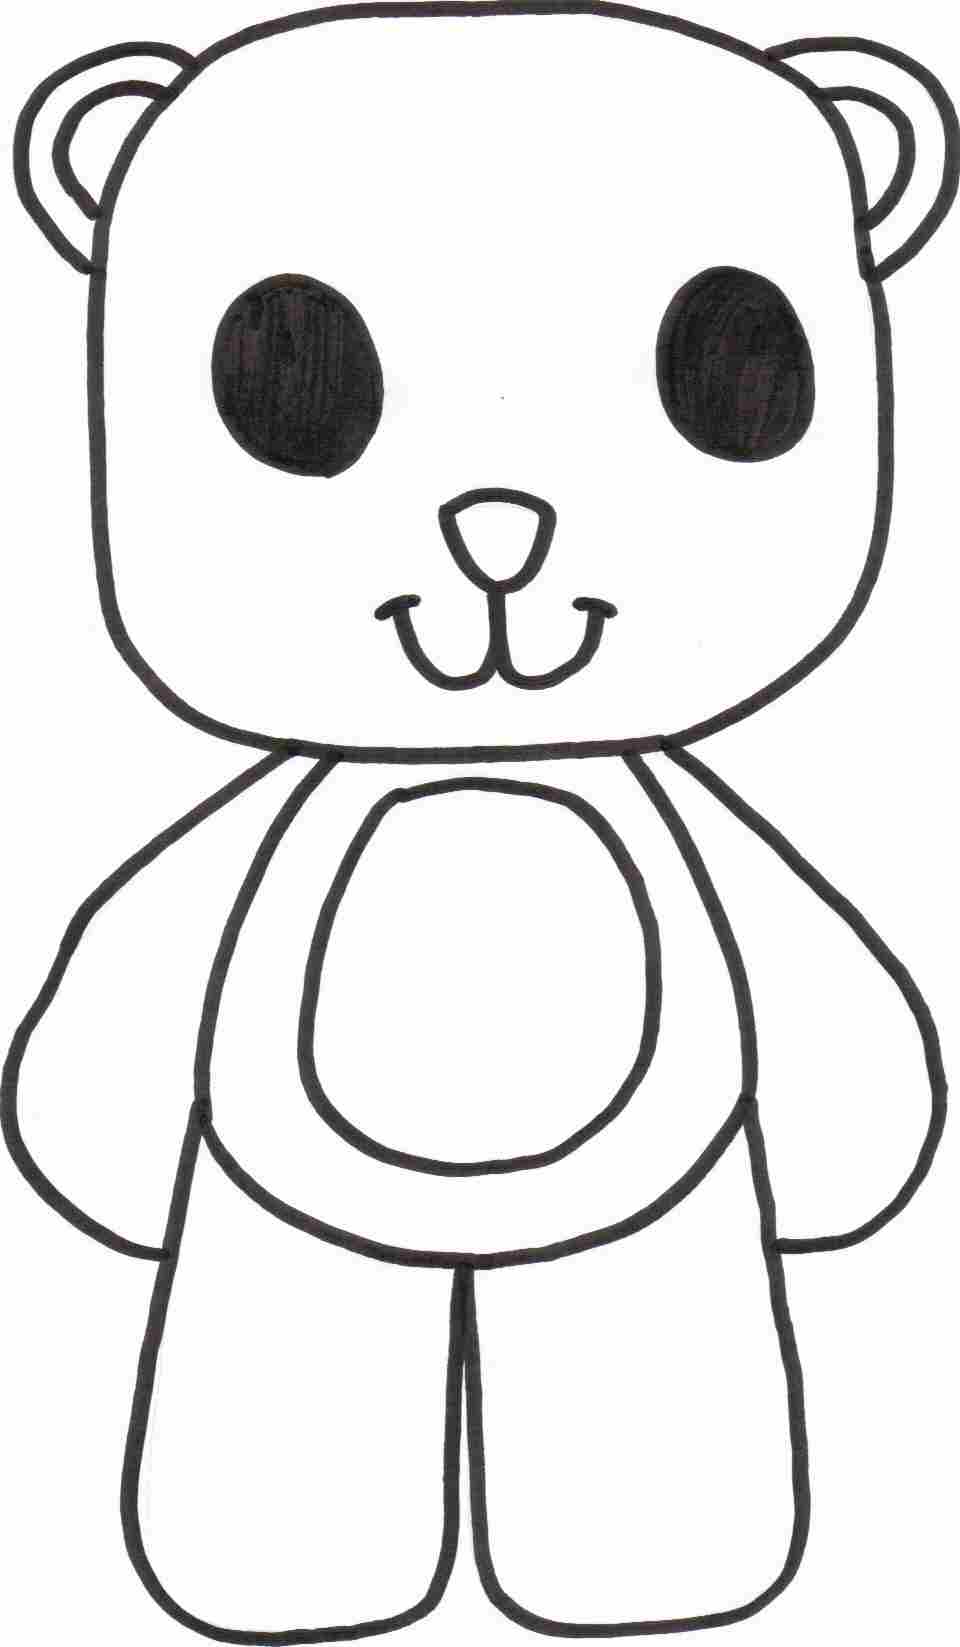 20 Awesome Teddy Bear Coloring Pages Free Printable - VoteForVerde.com